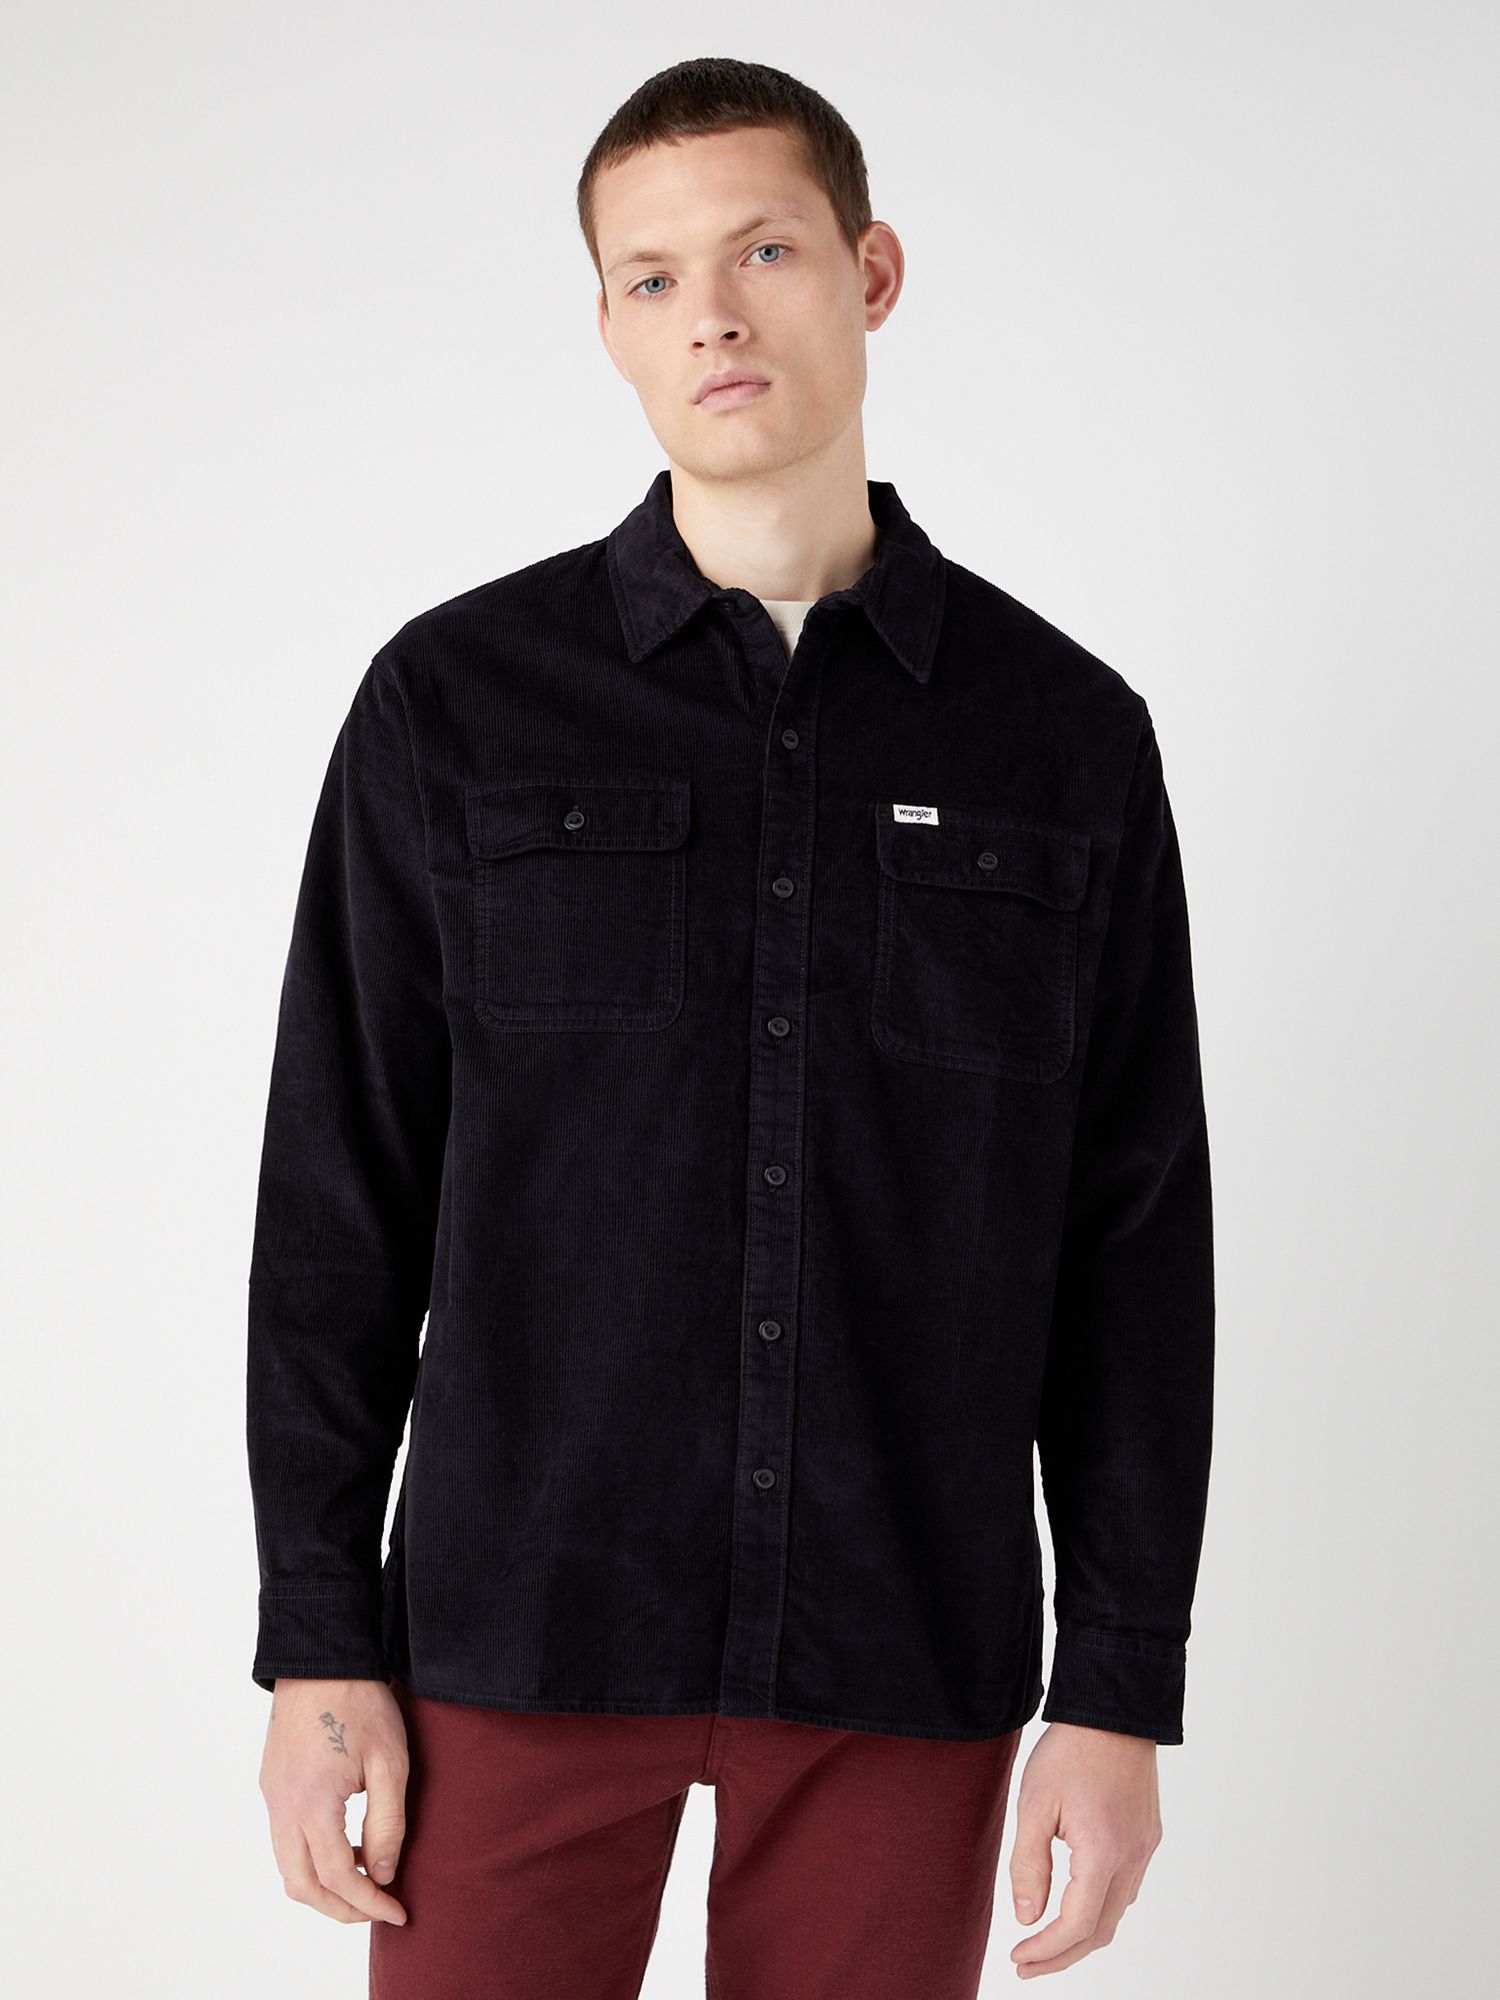 Wrangler Double Pocket Relaxed Fit Shirt, Black, XL